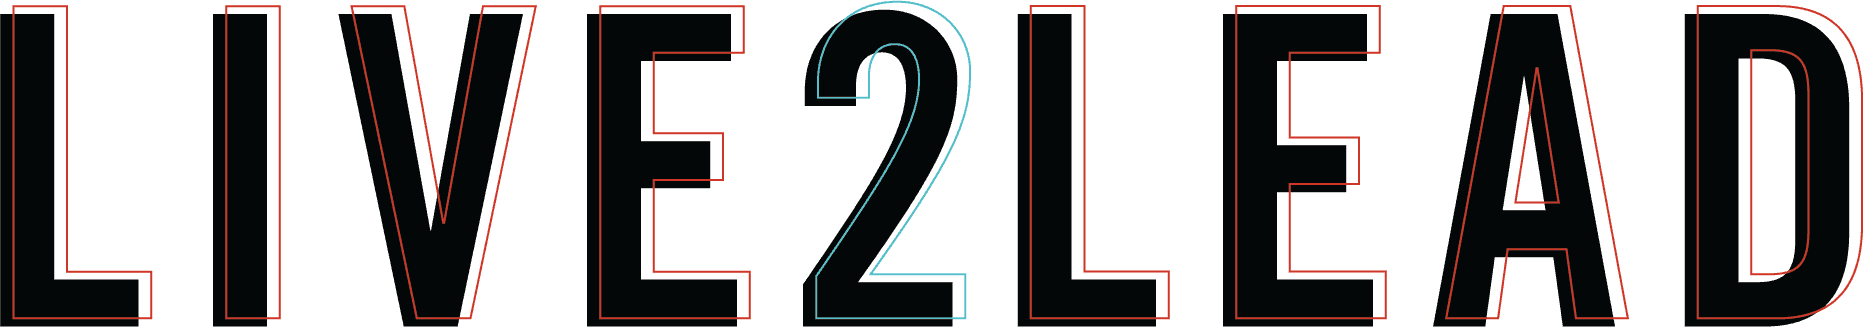 Logo for Live2Lead event